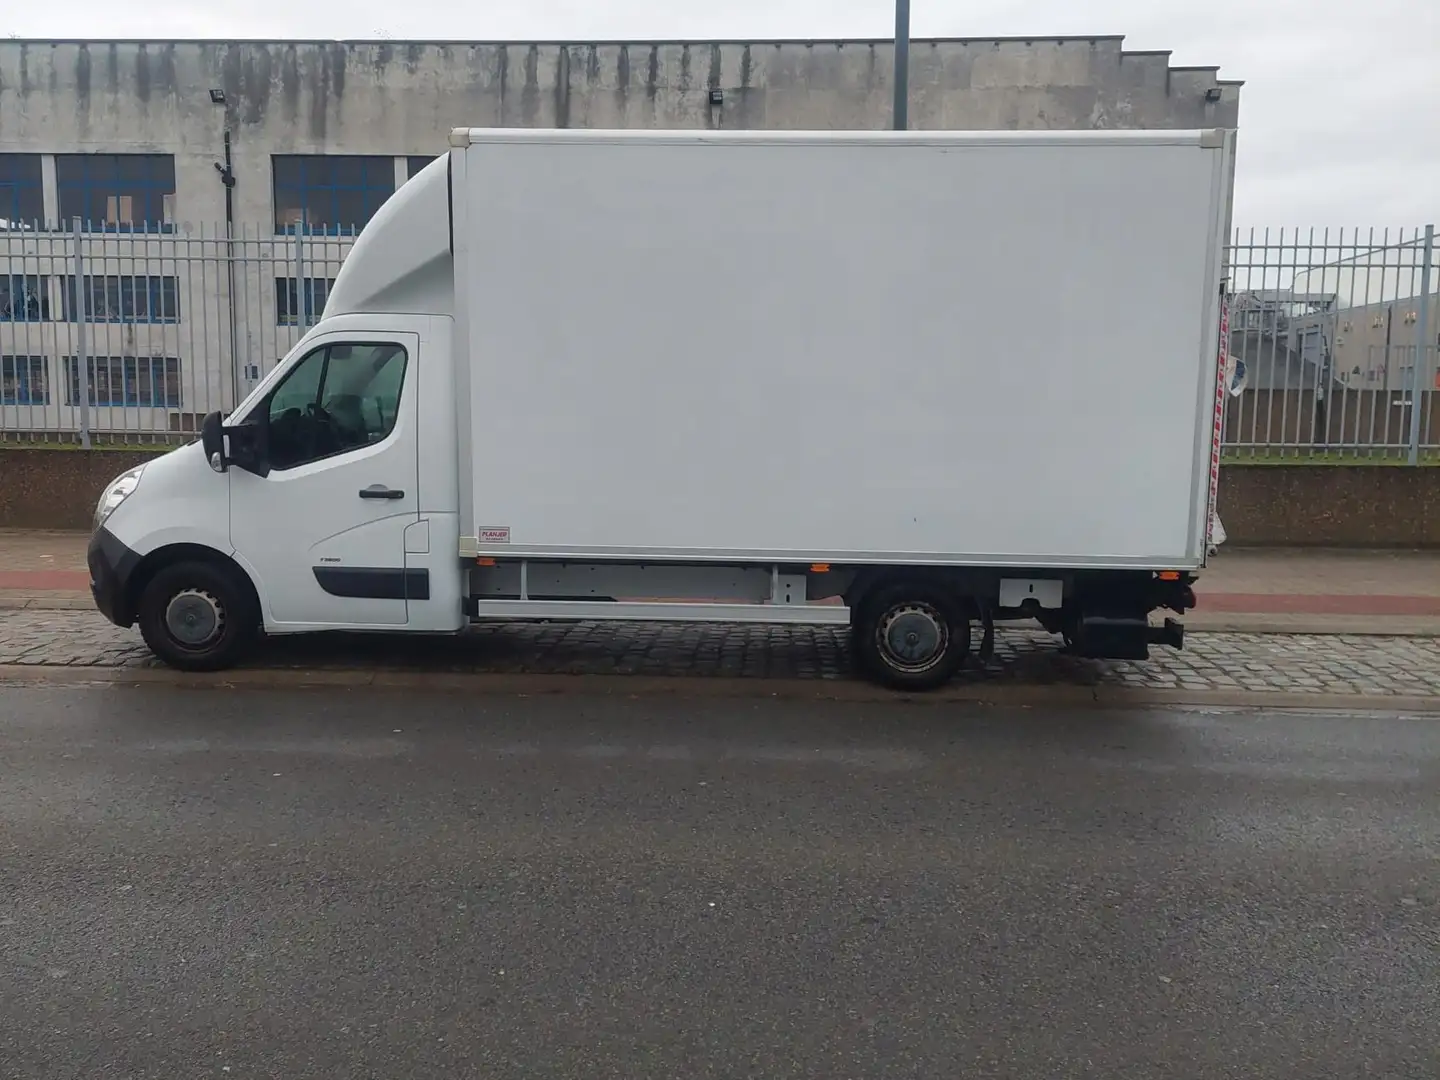 Opel Movano CHASSIS CAB C3500 L2H1 2.3 CDTI 125 CH Beyaz - 2